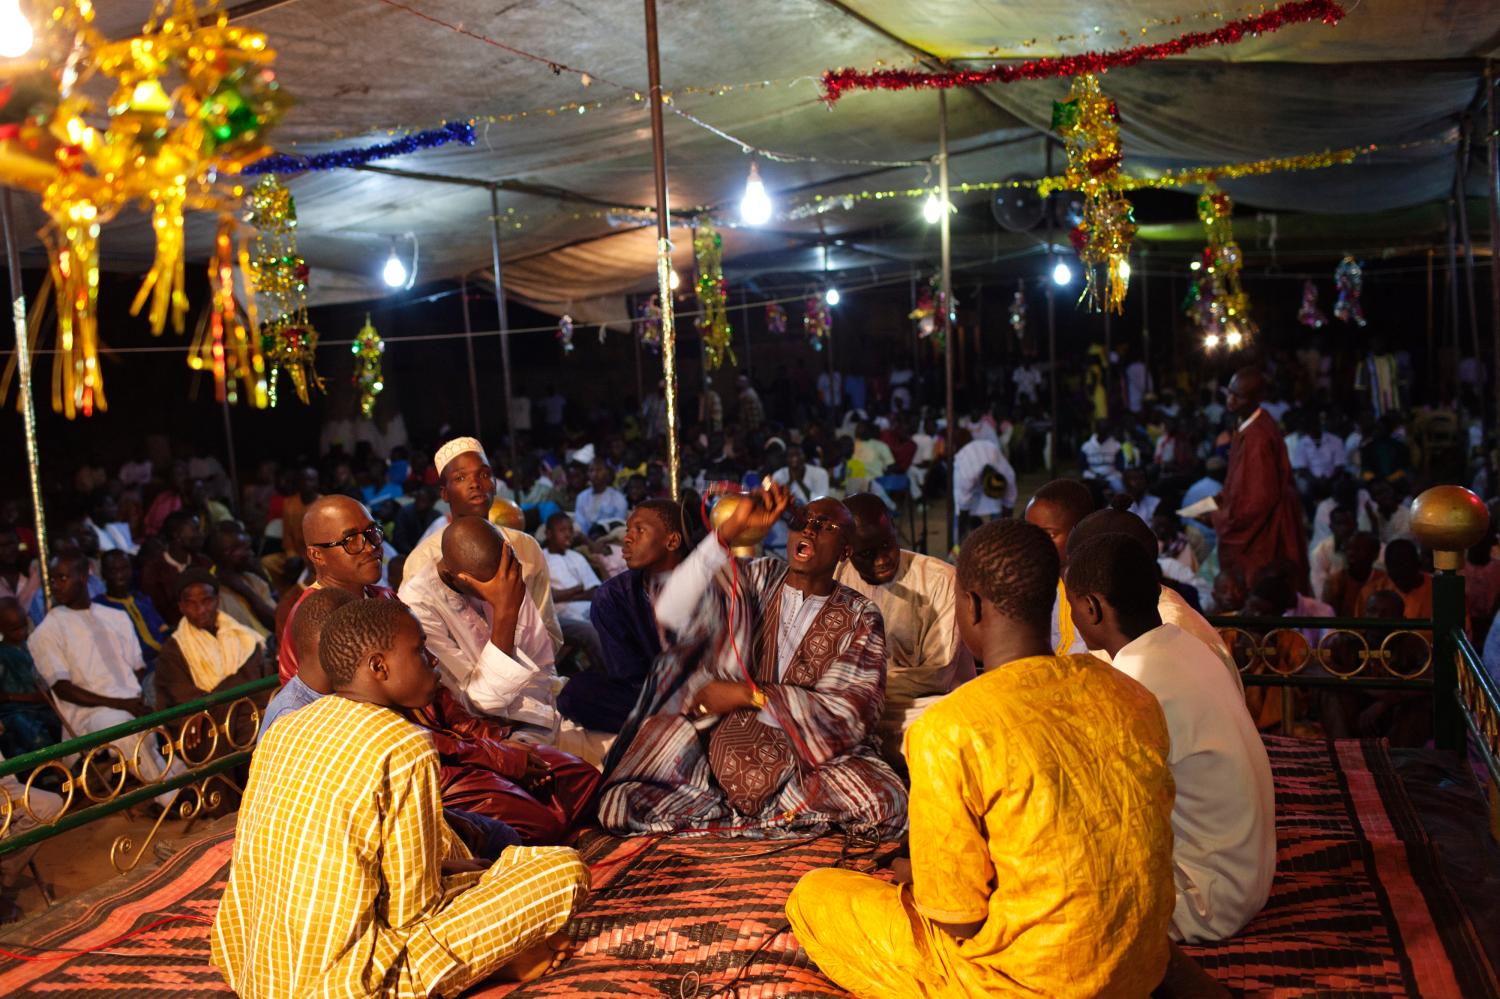 People from the Mouride sect of Sufi Islam chant prayers in the village of Ndande, May 18, 2013. Every year, inhabitants of the village take part in a Sufi Muslim ceremony called Gamou-Ndande. The ceremony combines nights of praying and chanting as well as traditionally animist ceremonies. Picture taken May 18, 2013. REUTERS/Joe Penney (SENEGAL - Tags: RELIGION SOCIETY) - RTXZWN5